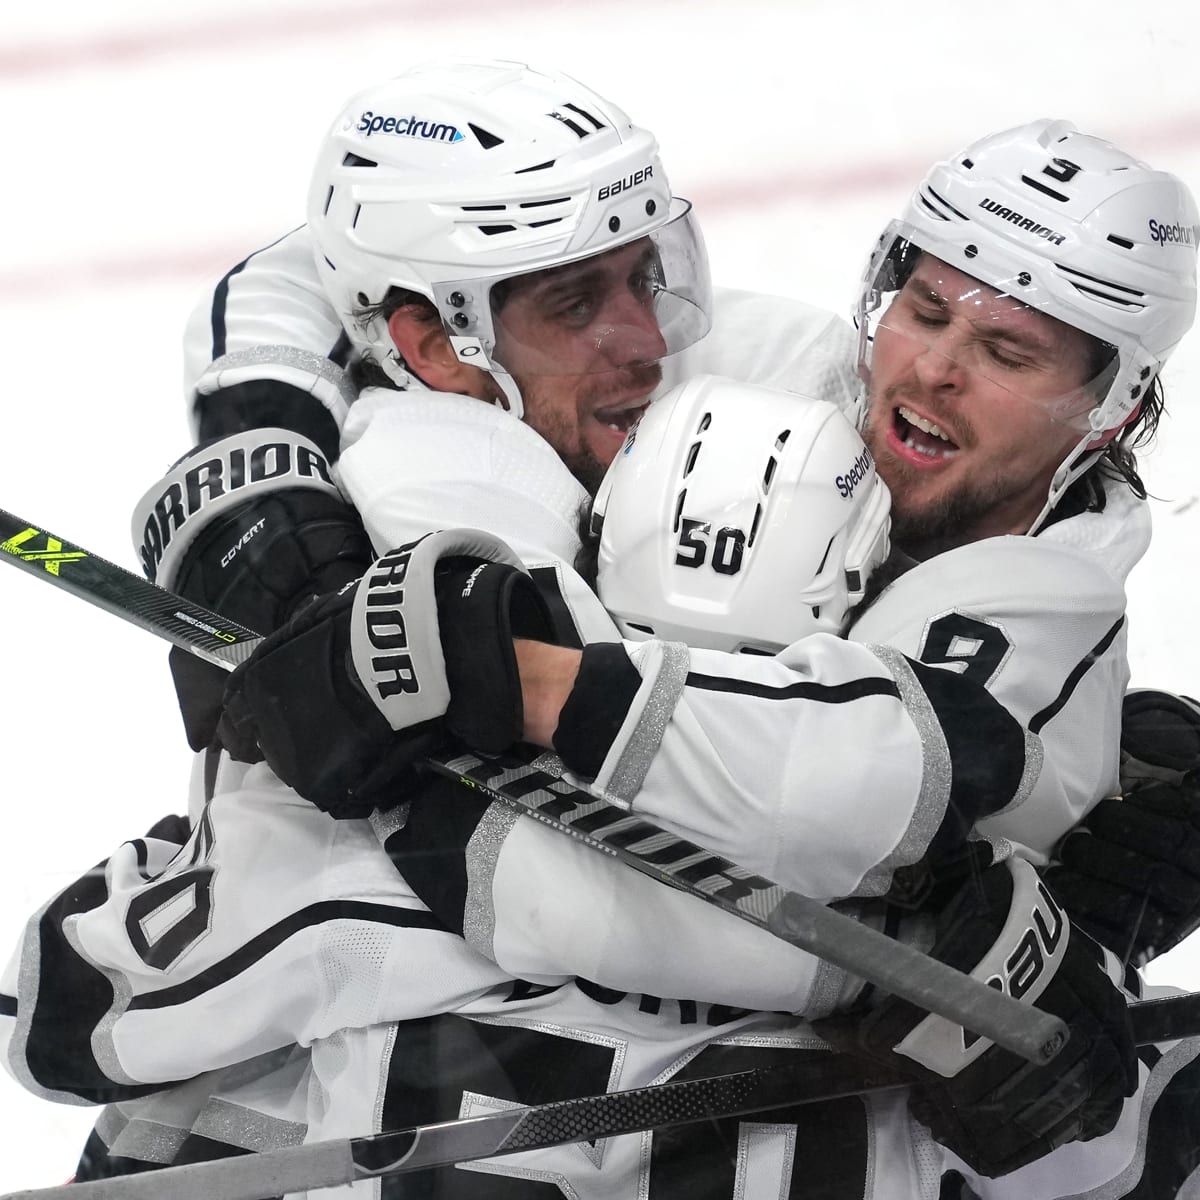 NHL Odds: Handicapping the Los Angeles Kings - NHL Rumors